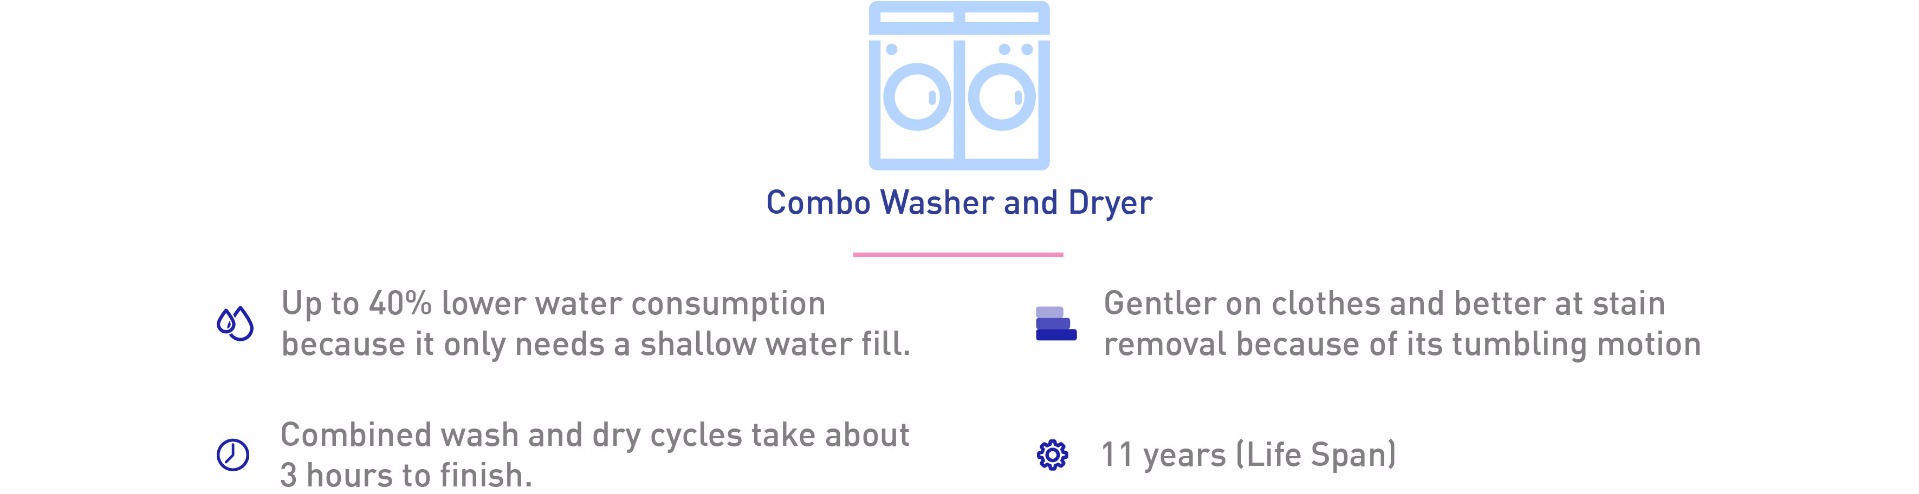 washer buyers guide type 2